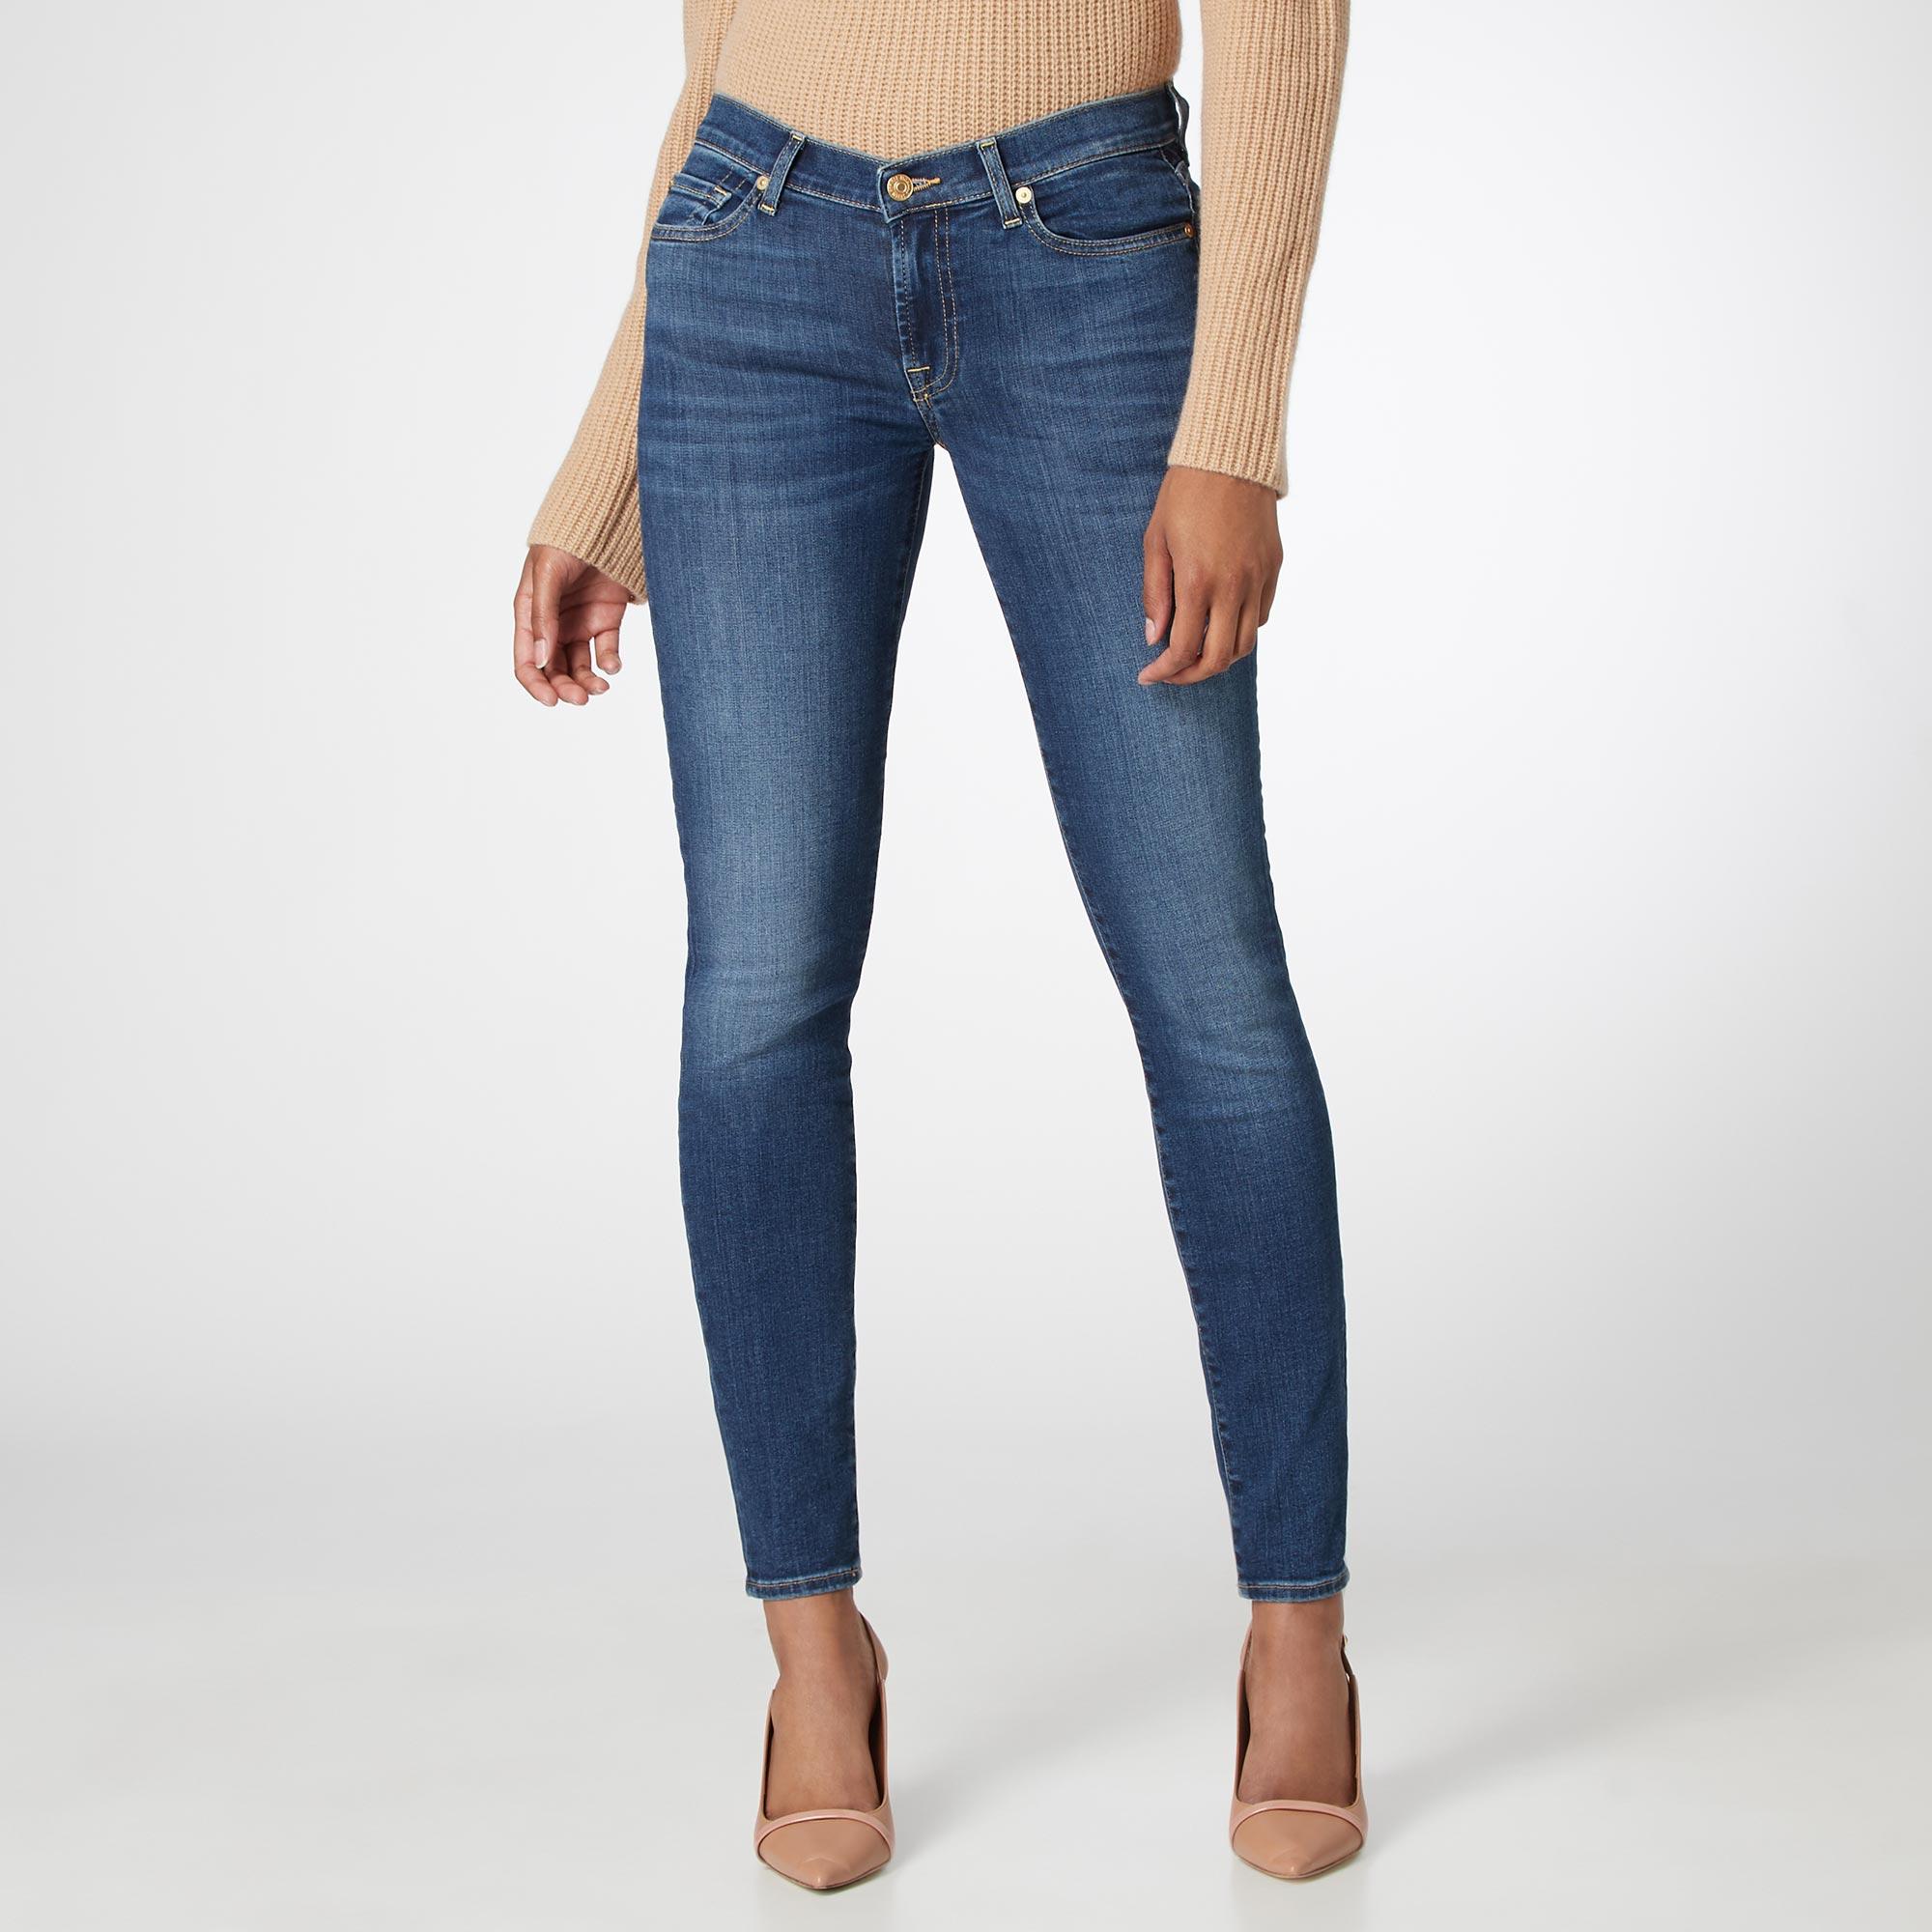 The Skinny Bair Mid-Rise Jeans